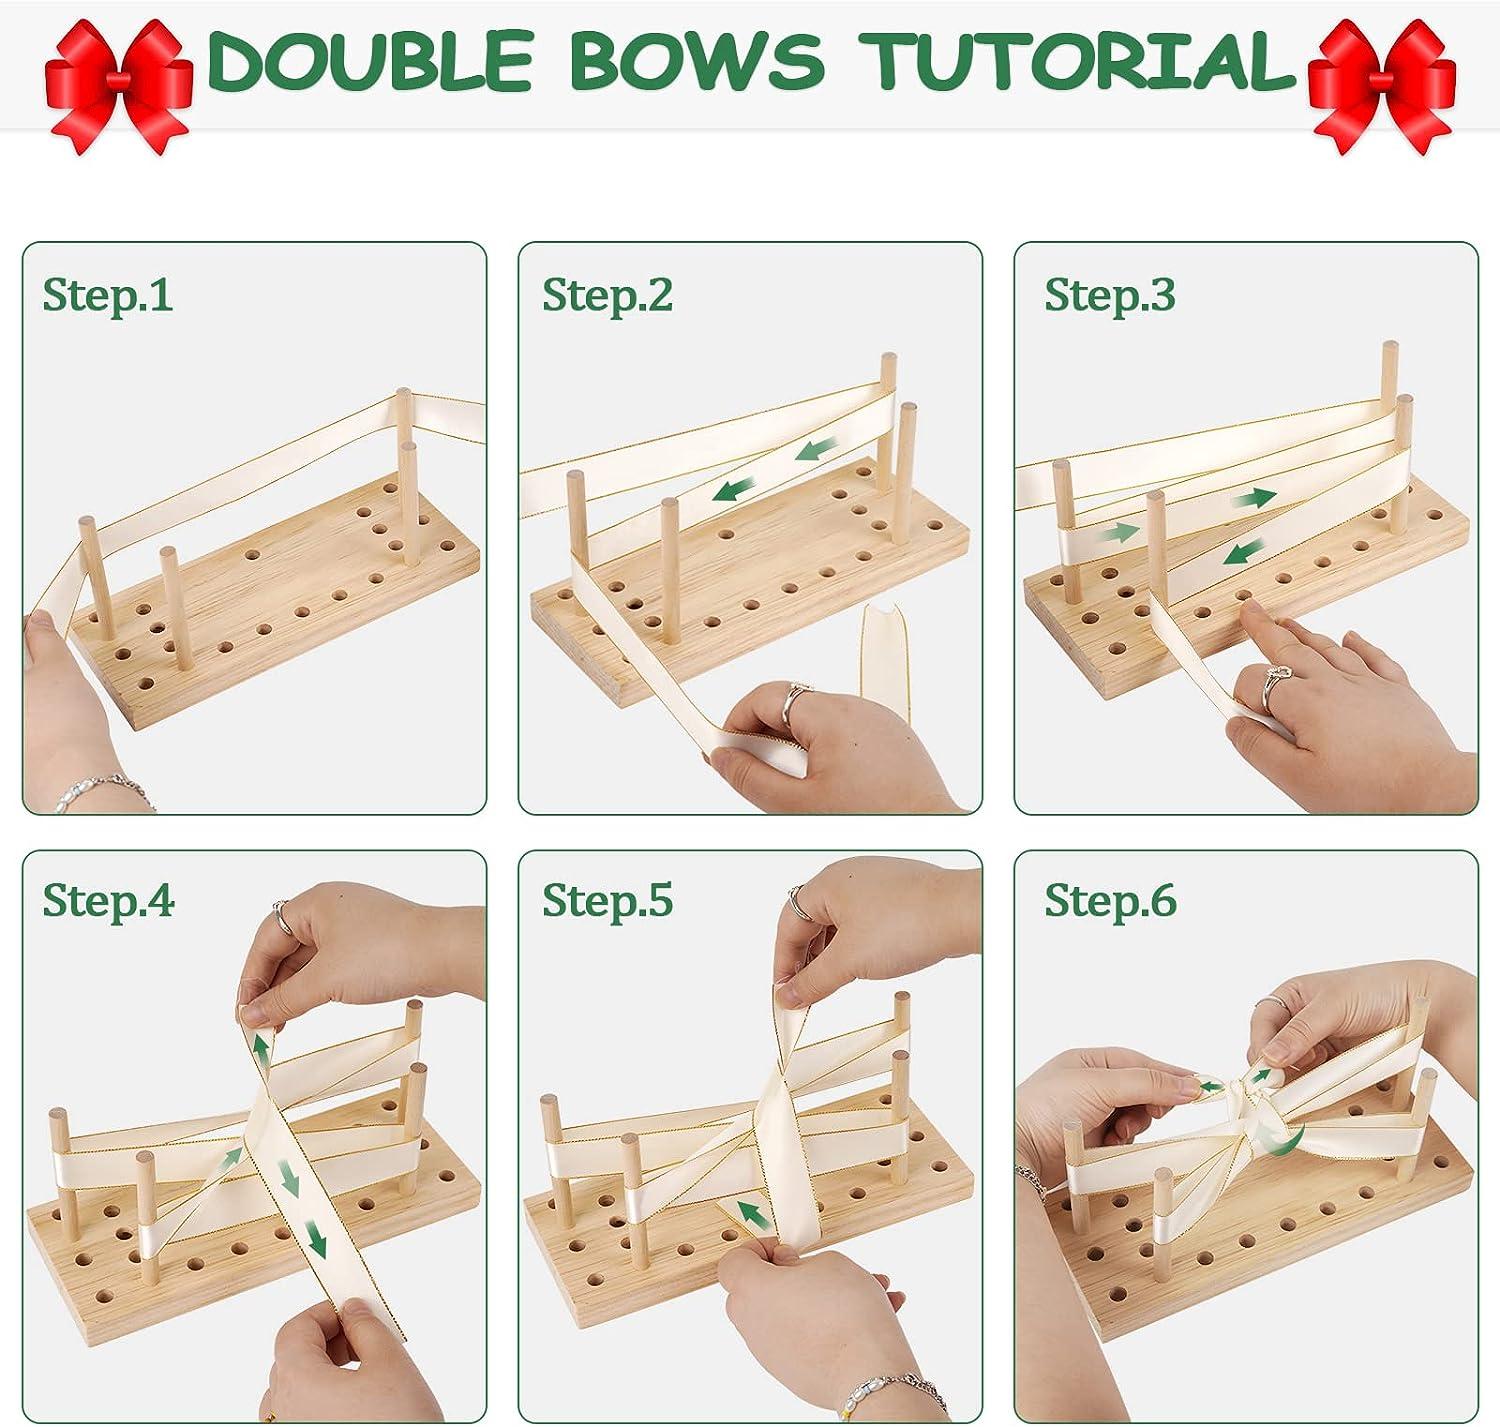 Ribbon Garland Bow Maker Double Sided Wooden Bow Making Tool DIY